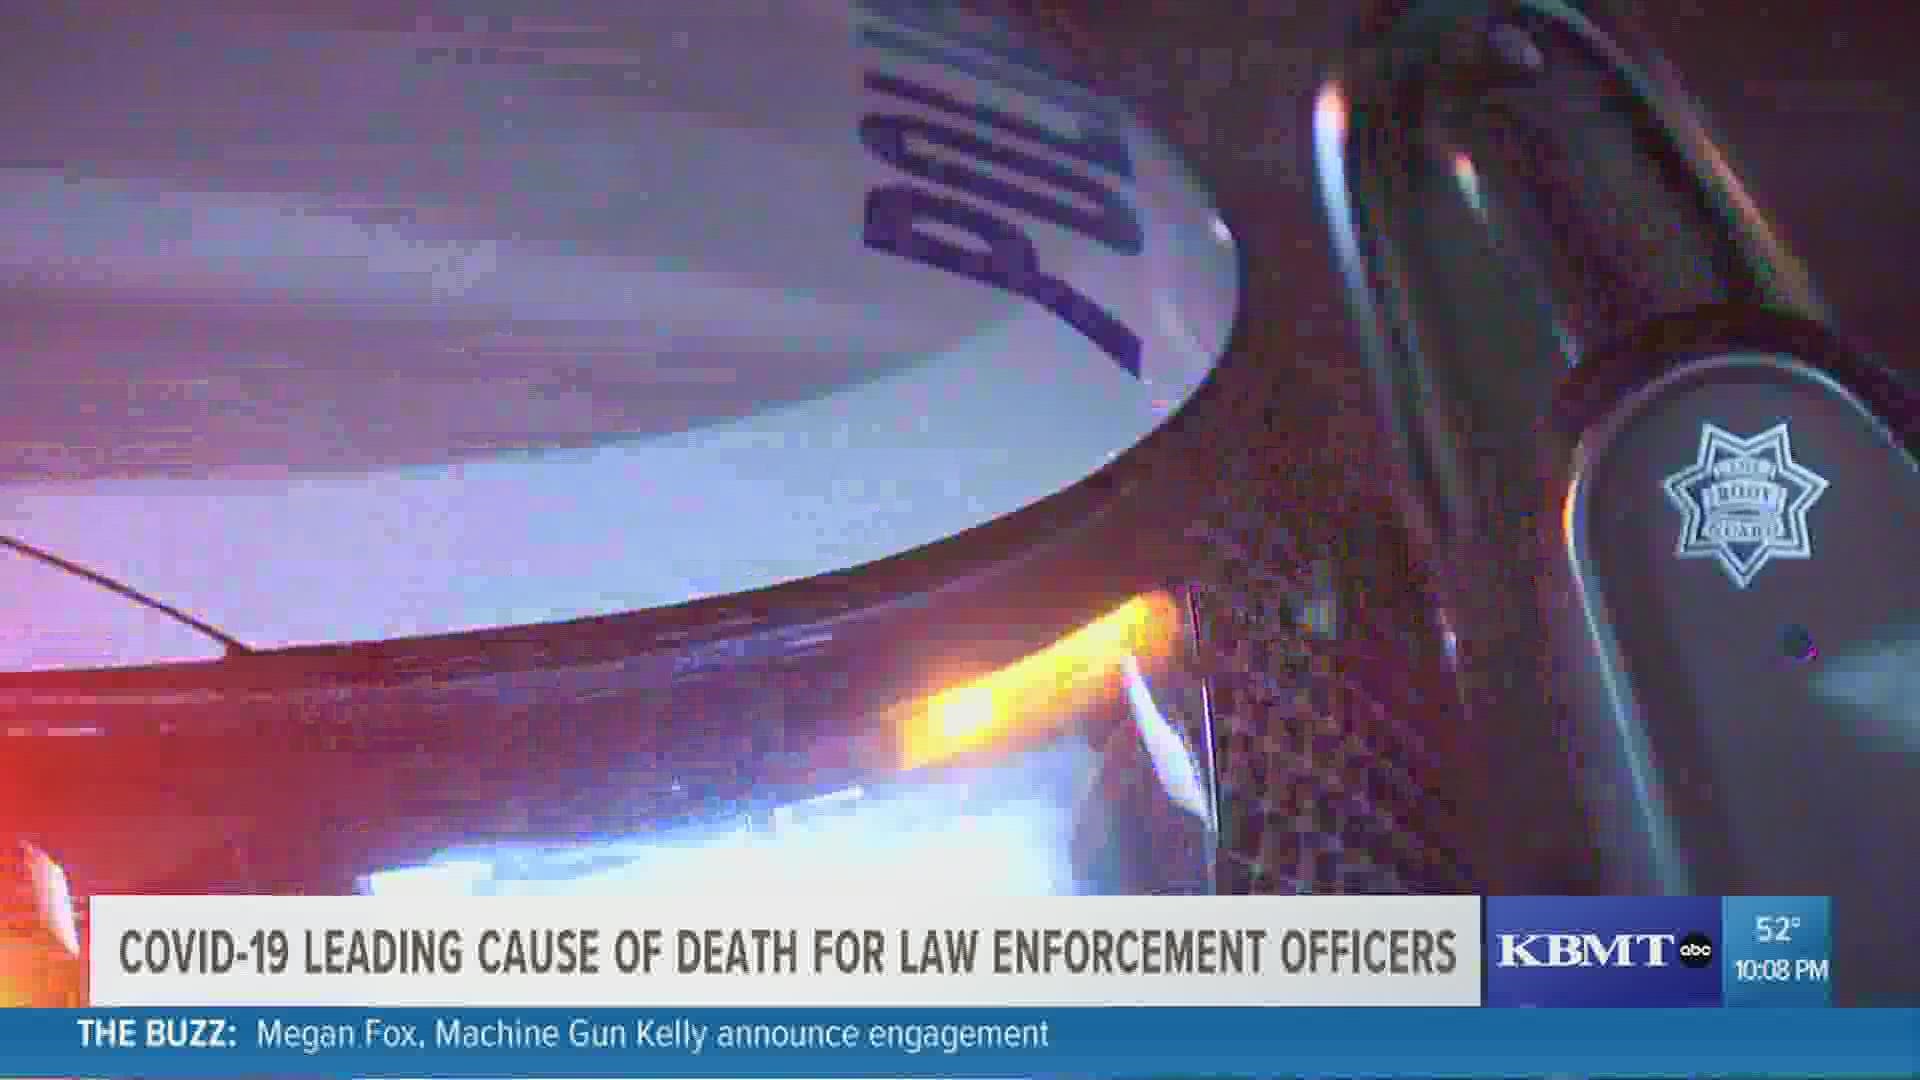 The report showed a total of 458 line-of-duty deaths happened last year.